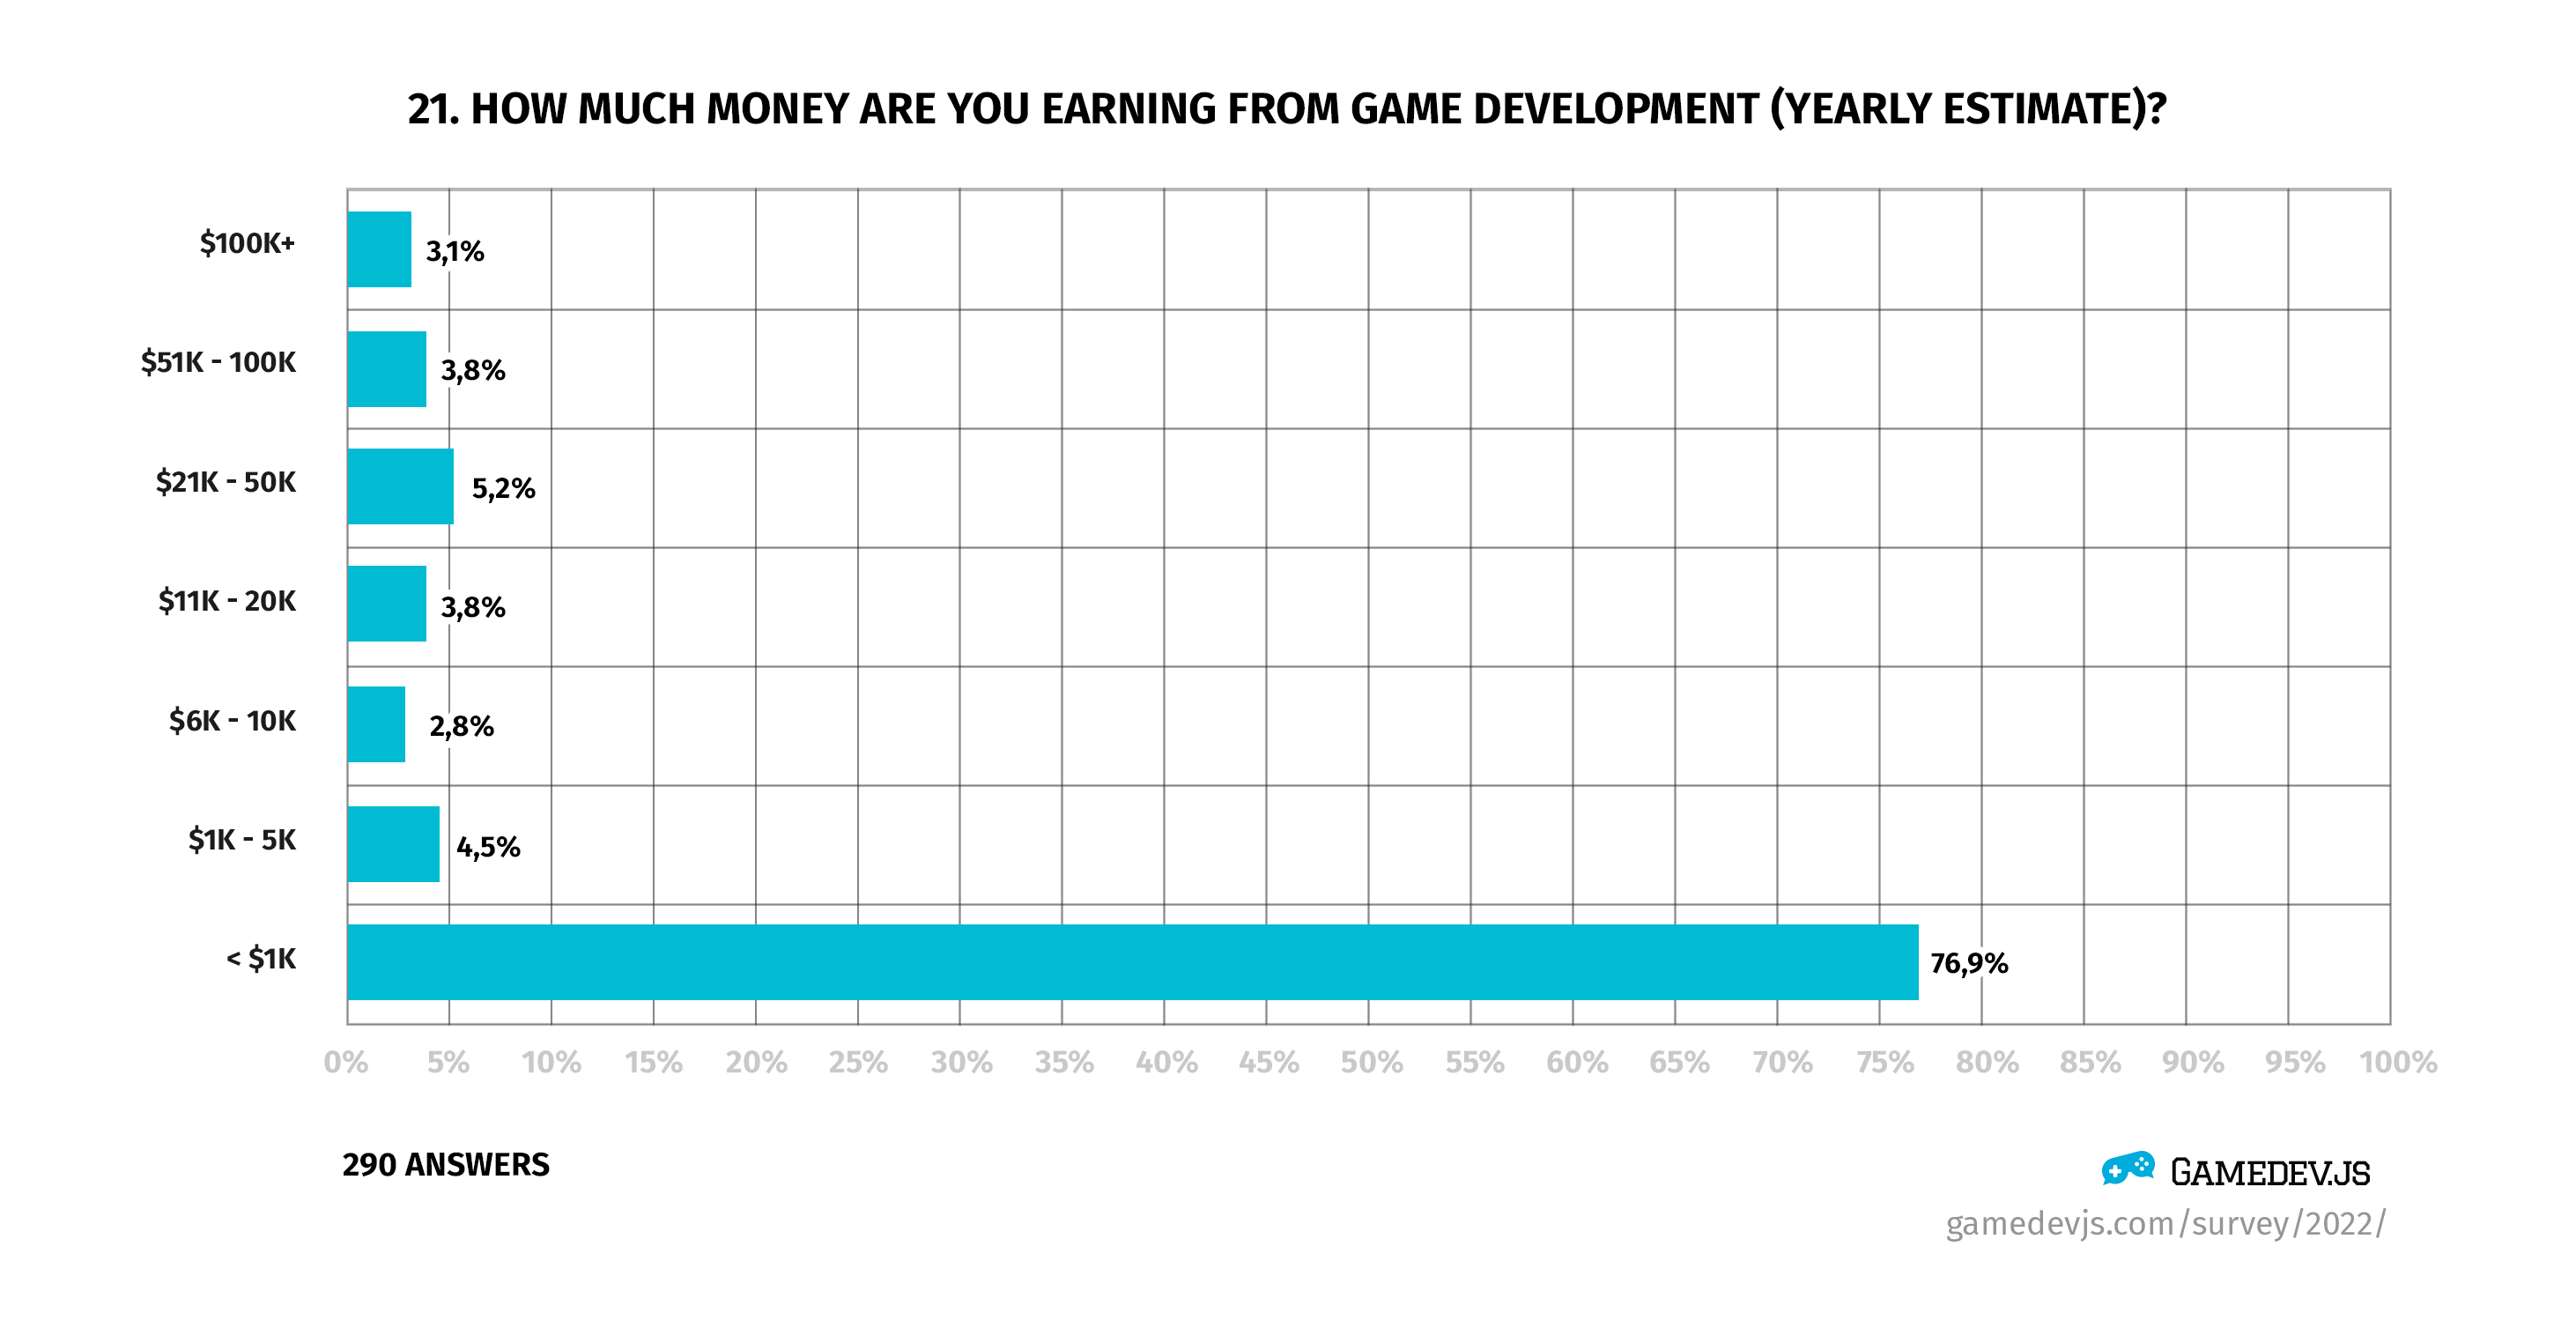 Gamedev.js Survey 2022 - Question #21: How much money are you earning from game development (yearly estimate)?